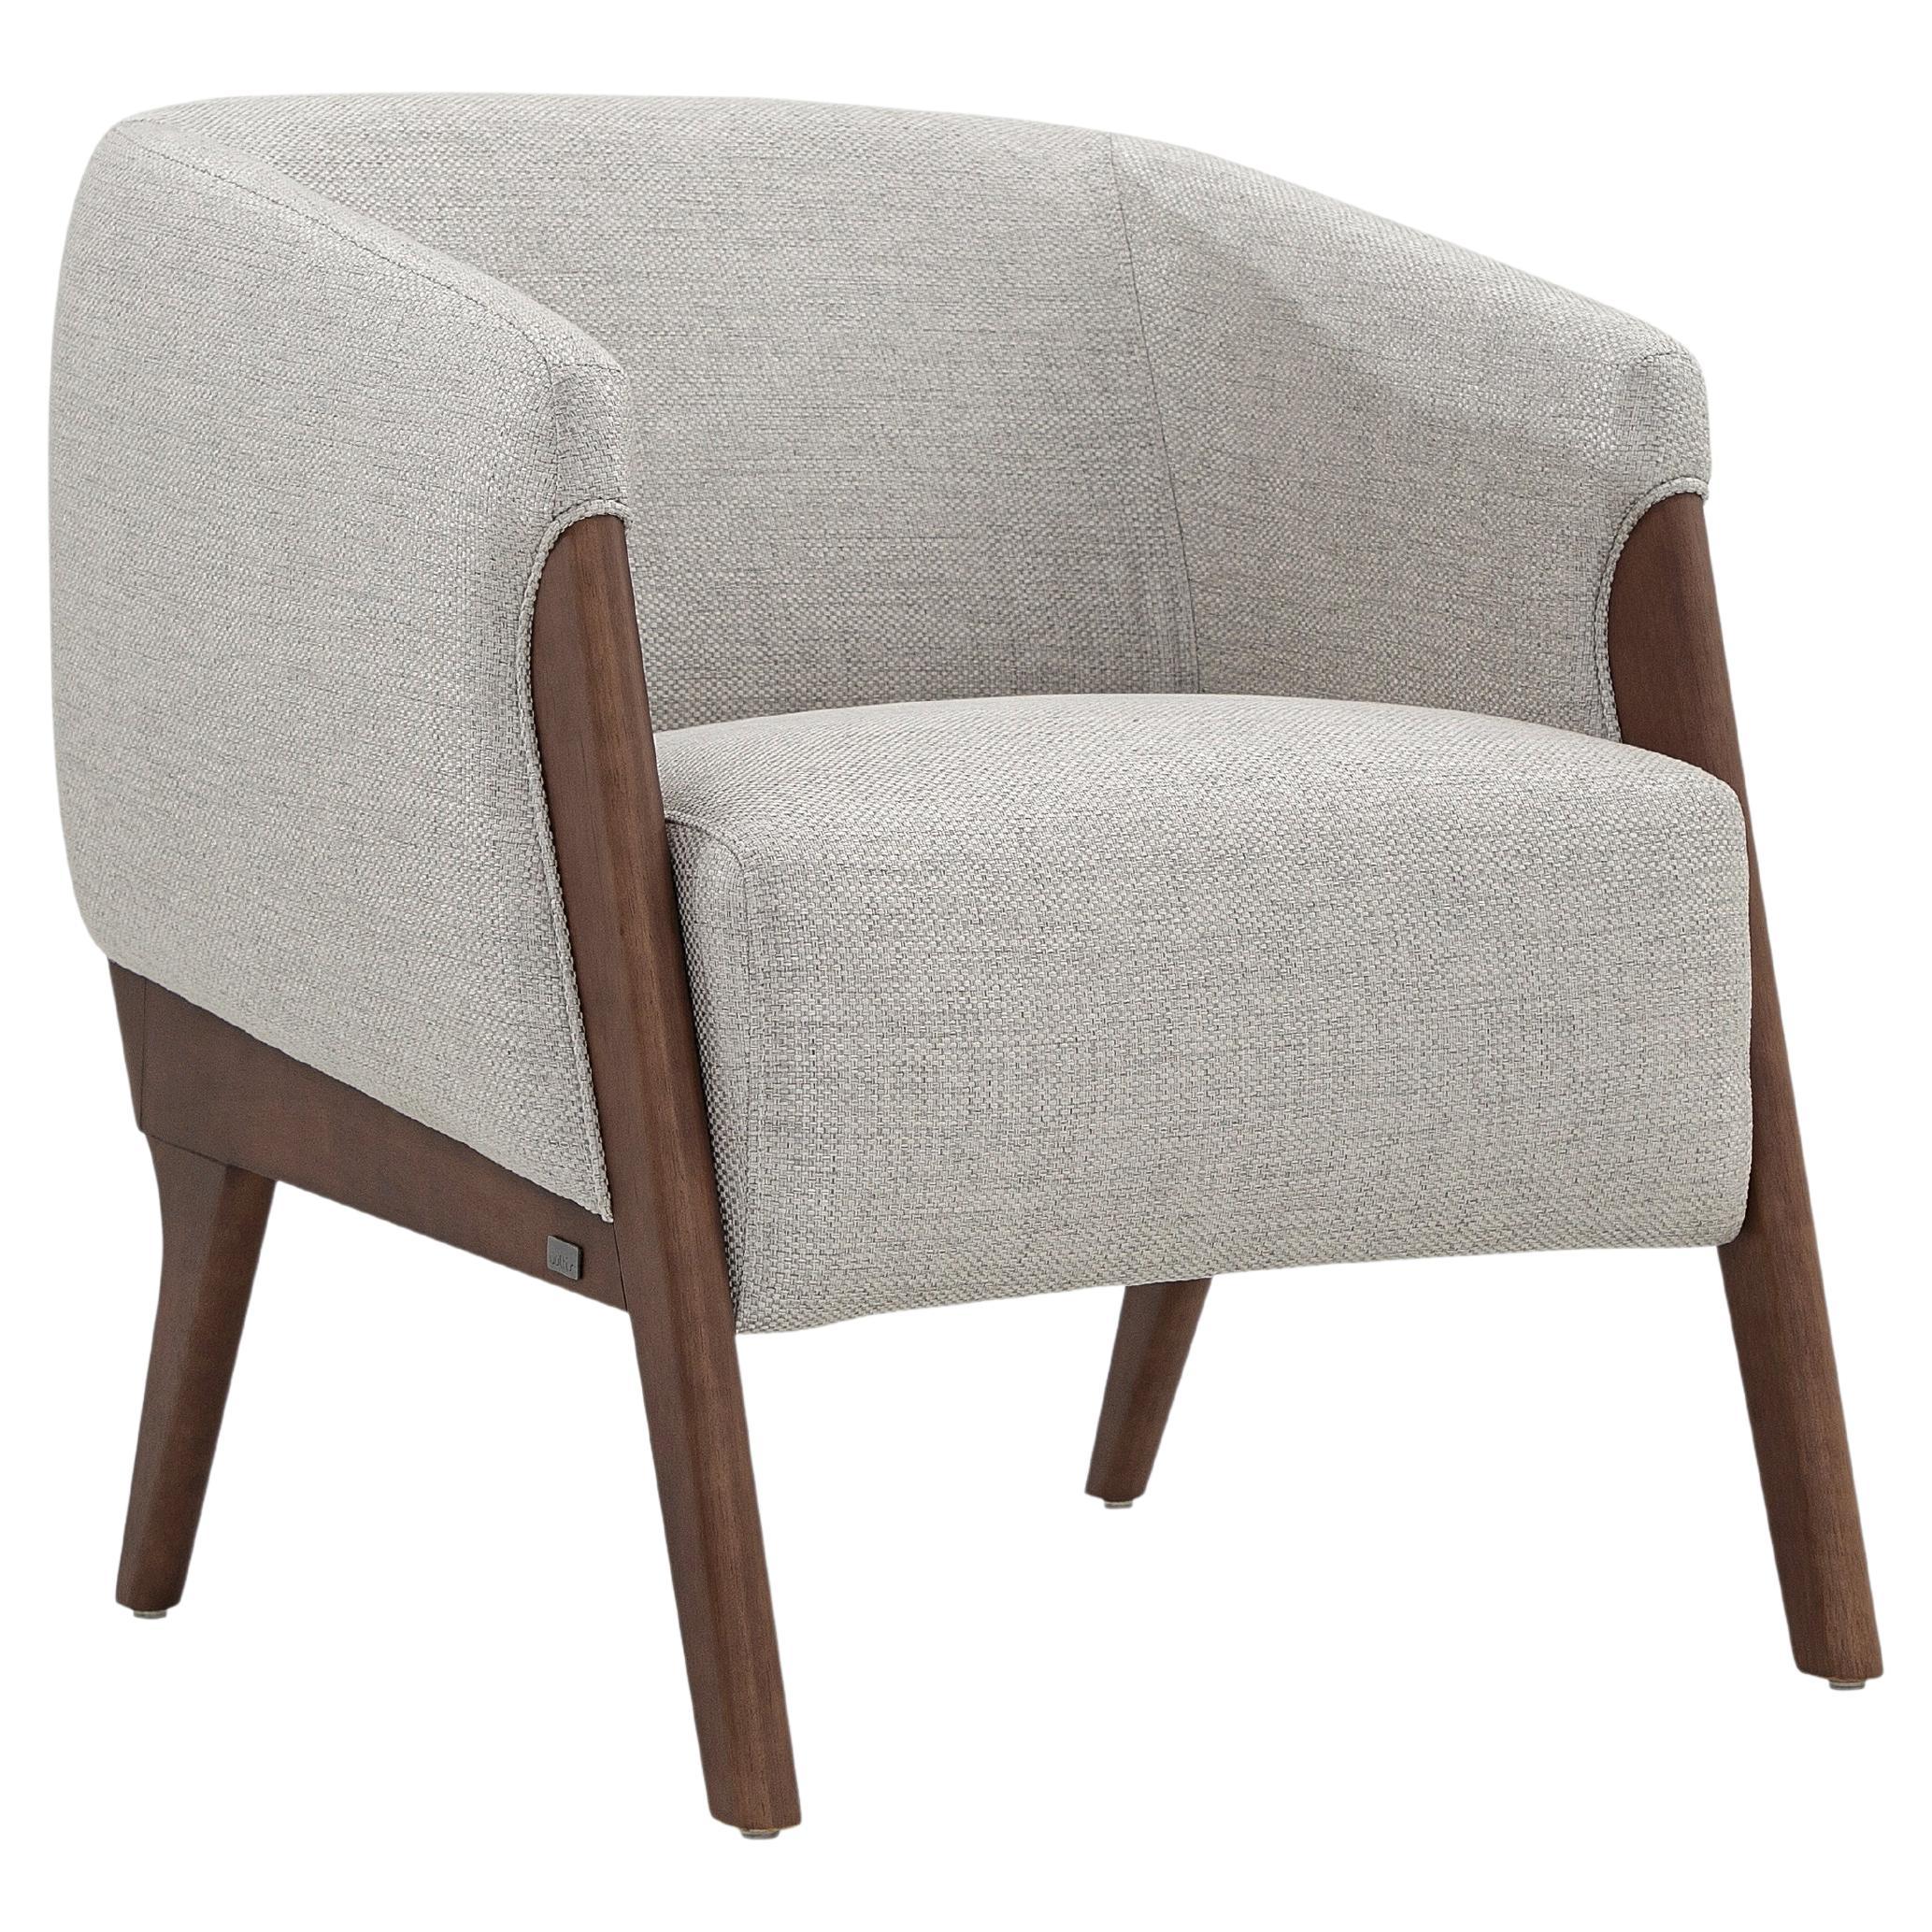 Abra Armchair in Light Gray Fabric and Walnut Wood Finish For Sale